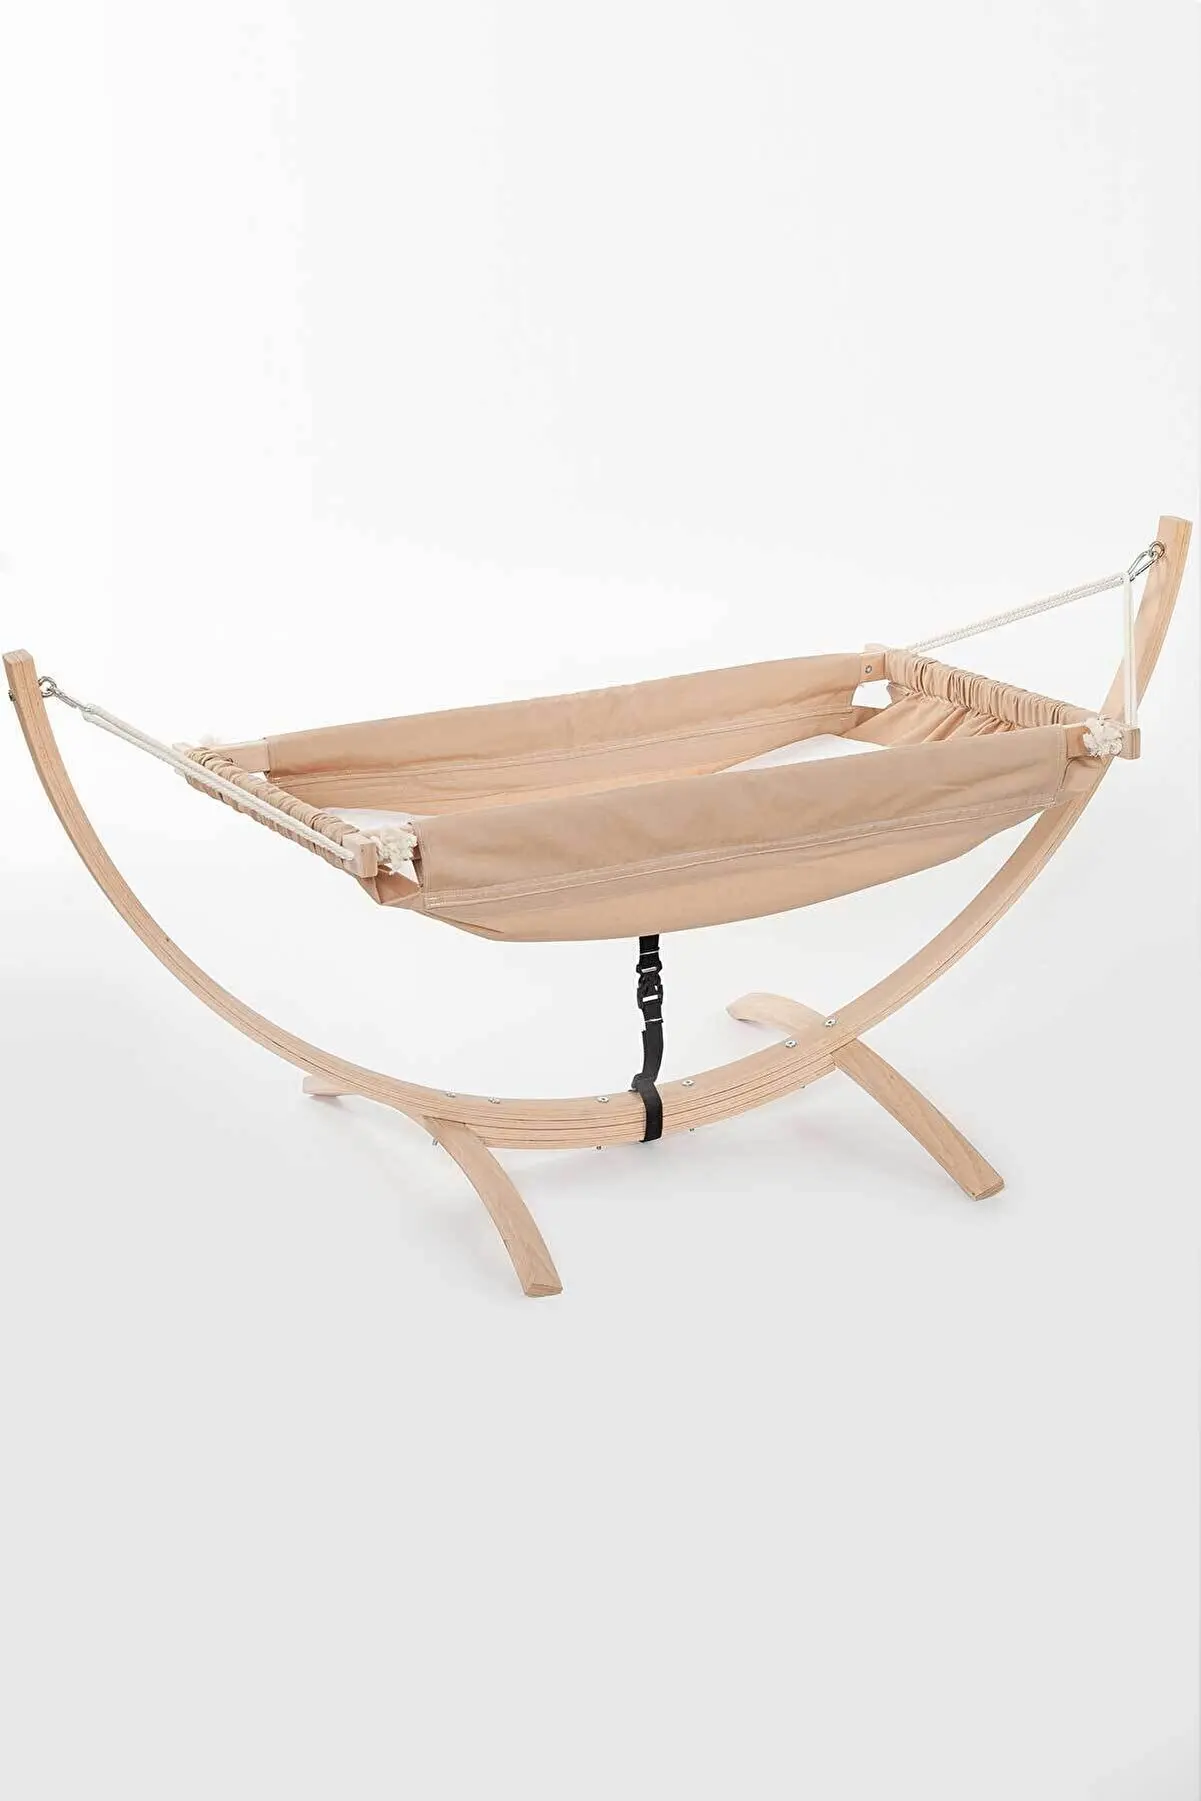 Portable Wooden Rocking Crib Newborn Baby For Natural Solid Wood Bed Sallanabilir Sleep Set Mother Lap High Quality